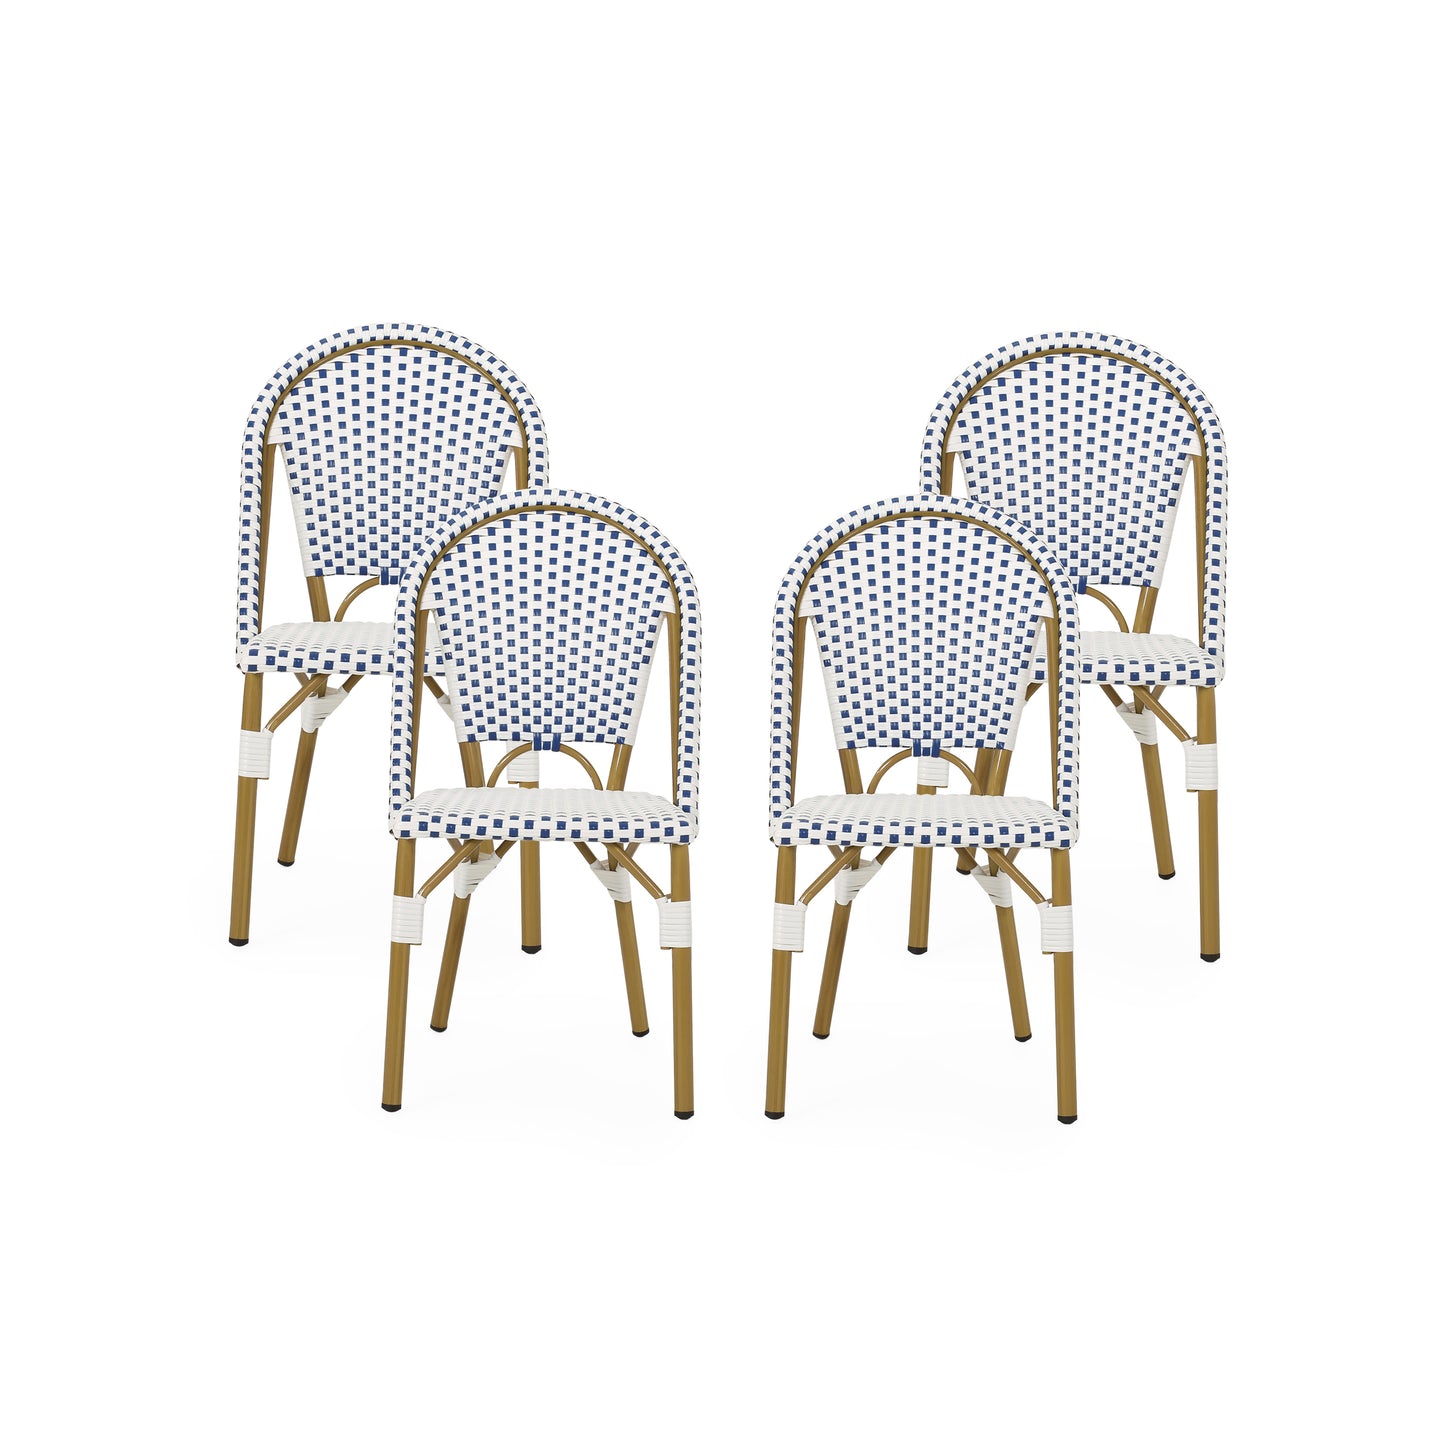 Desire Outdoor French Bistro Chair (Set of 4)